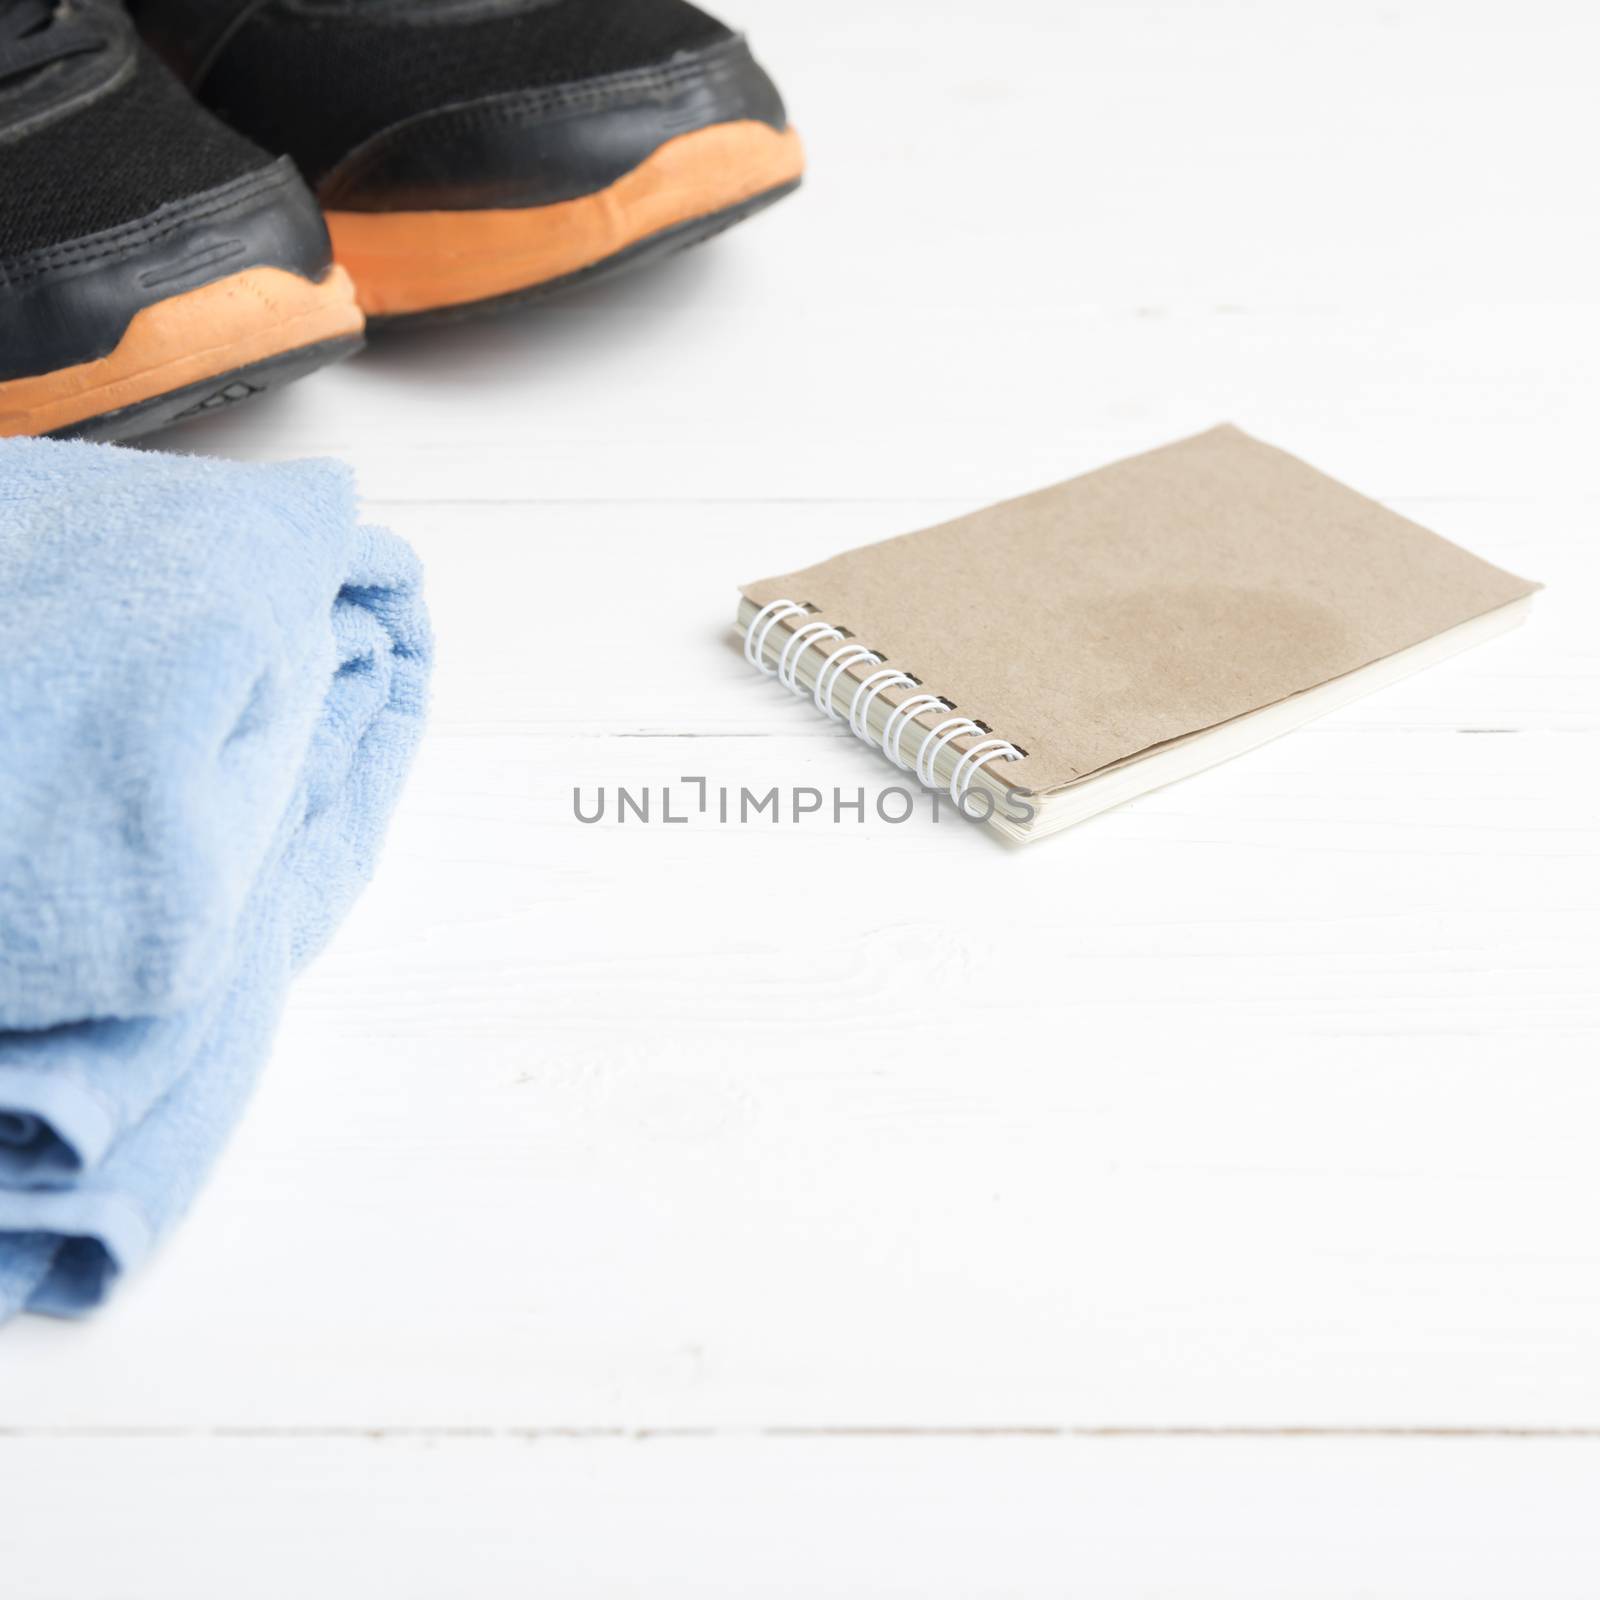 fitness equipment : running shoes,blue towel and notepad on white wood table